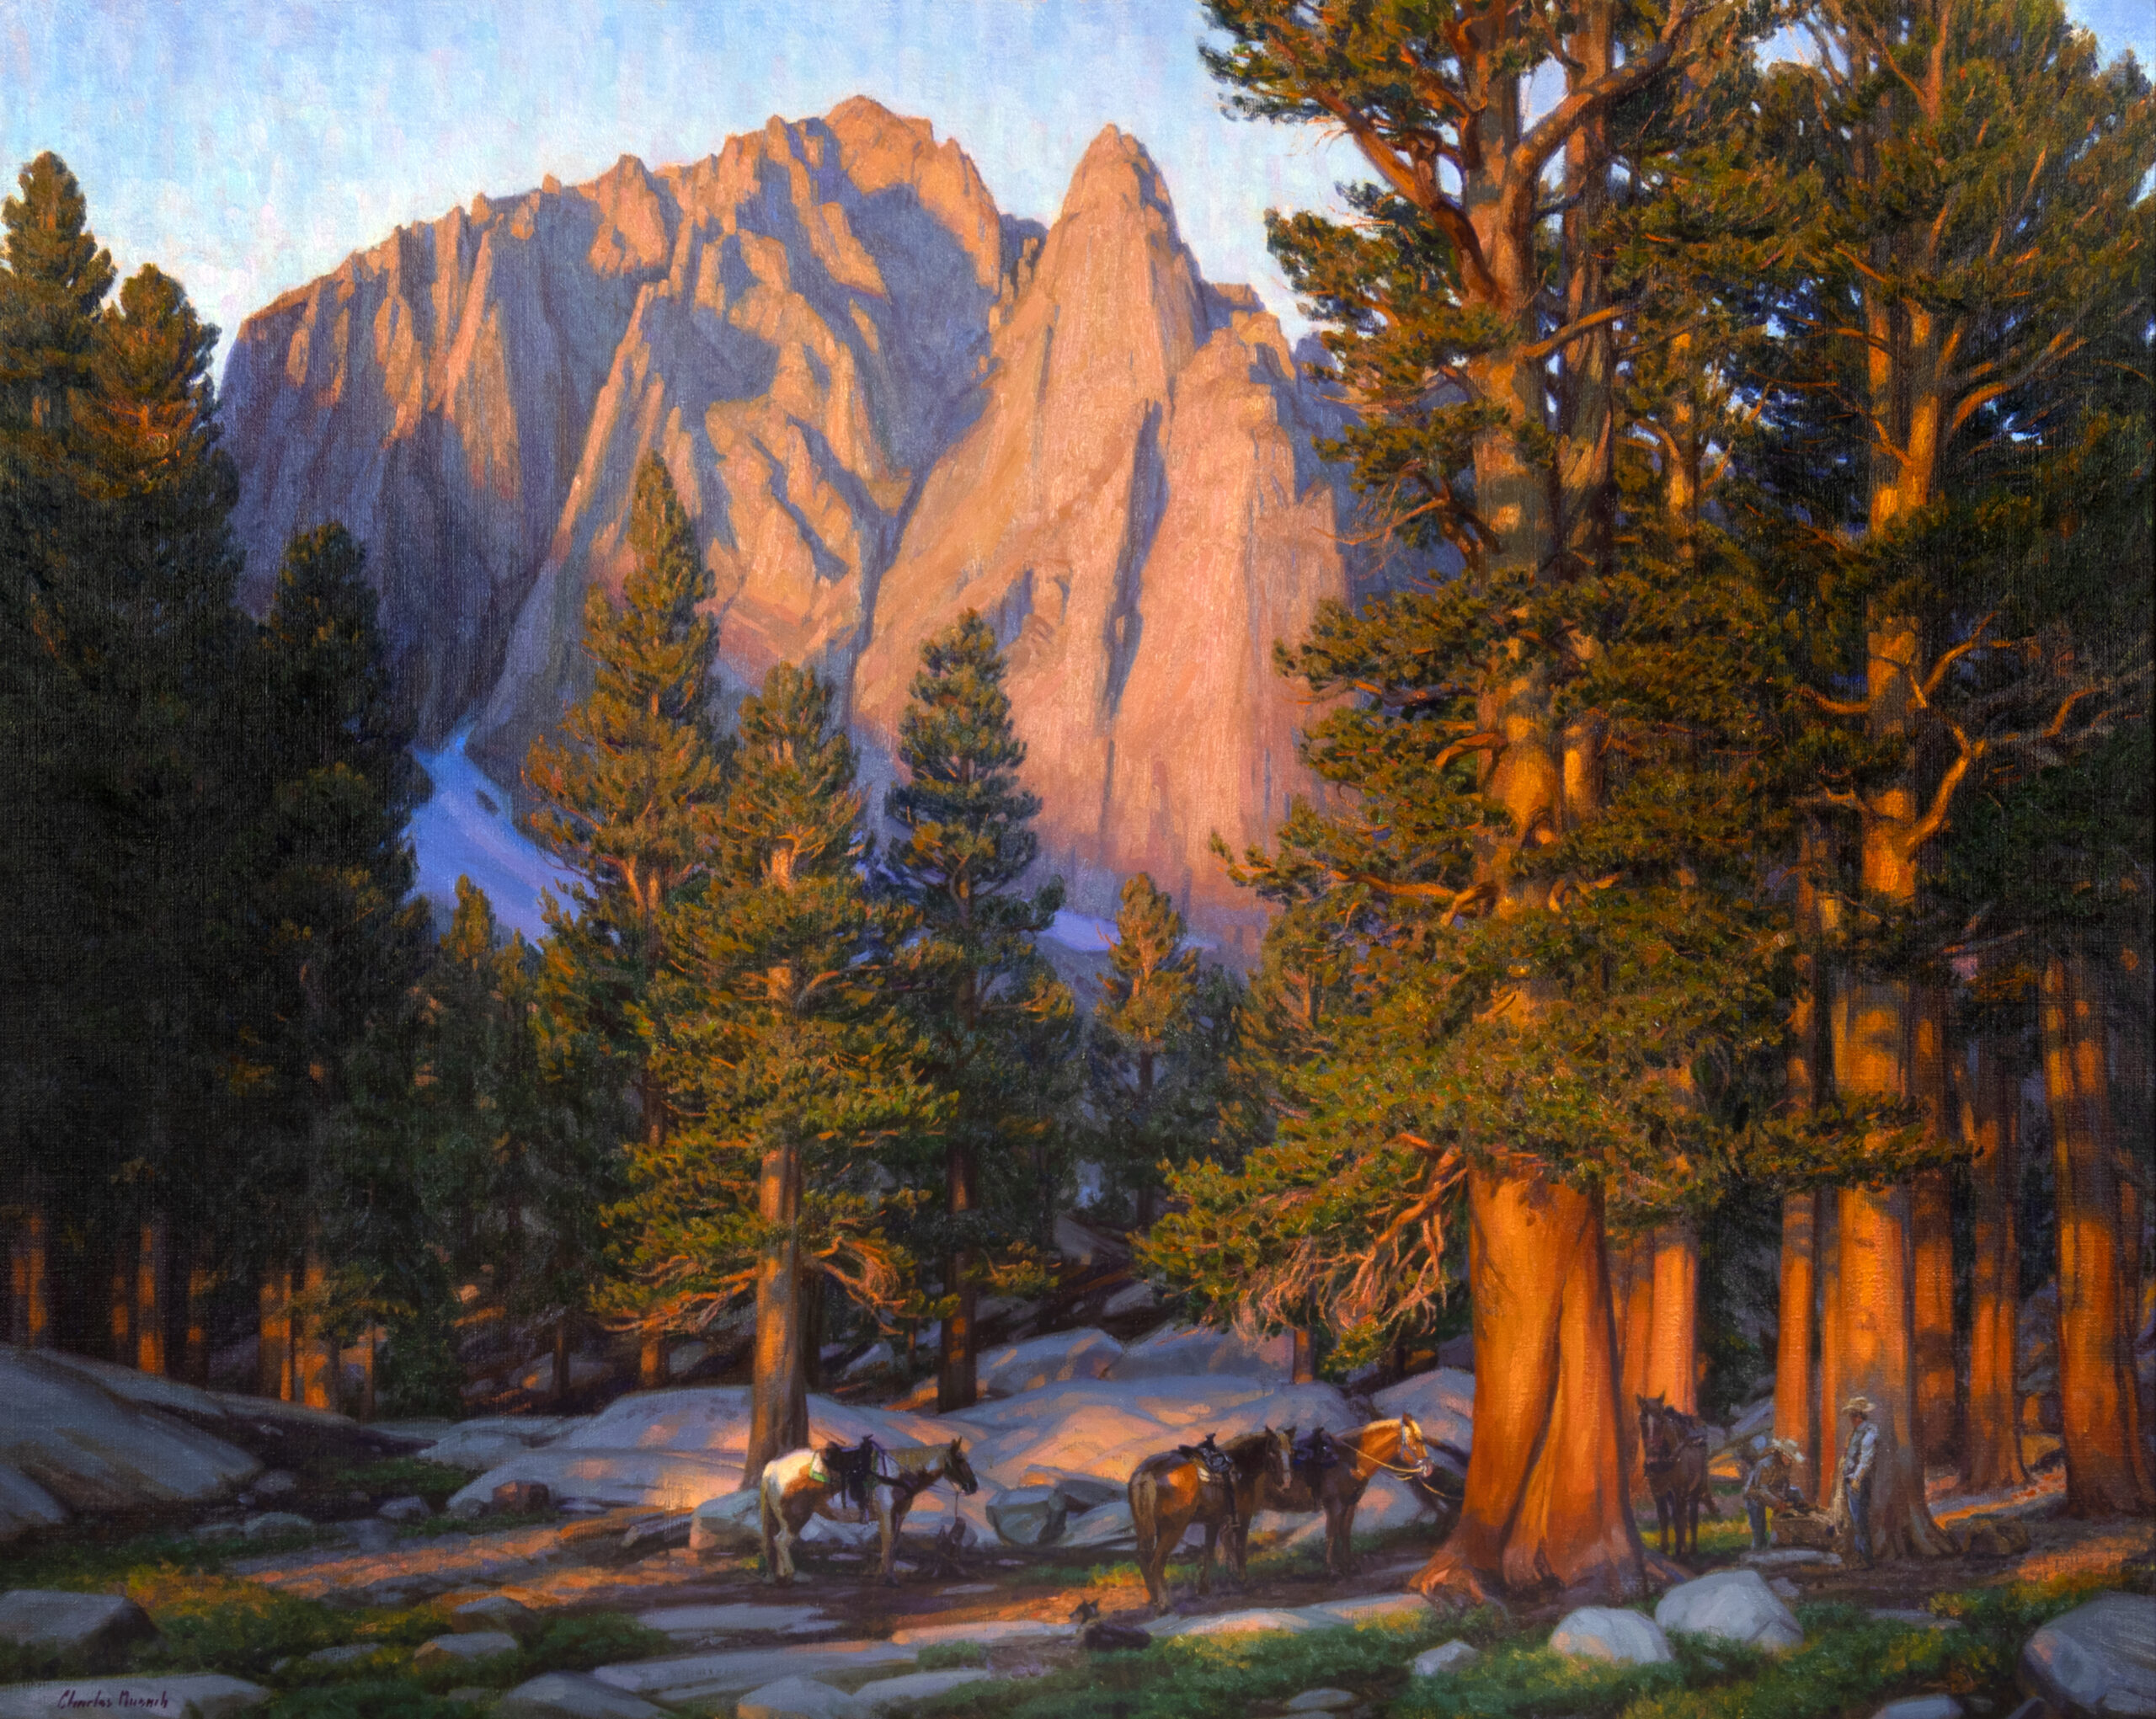 Charles Muench (1966- ) Sunrise in the Land of Giants oil on canvas